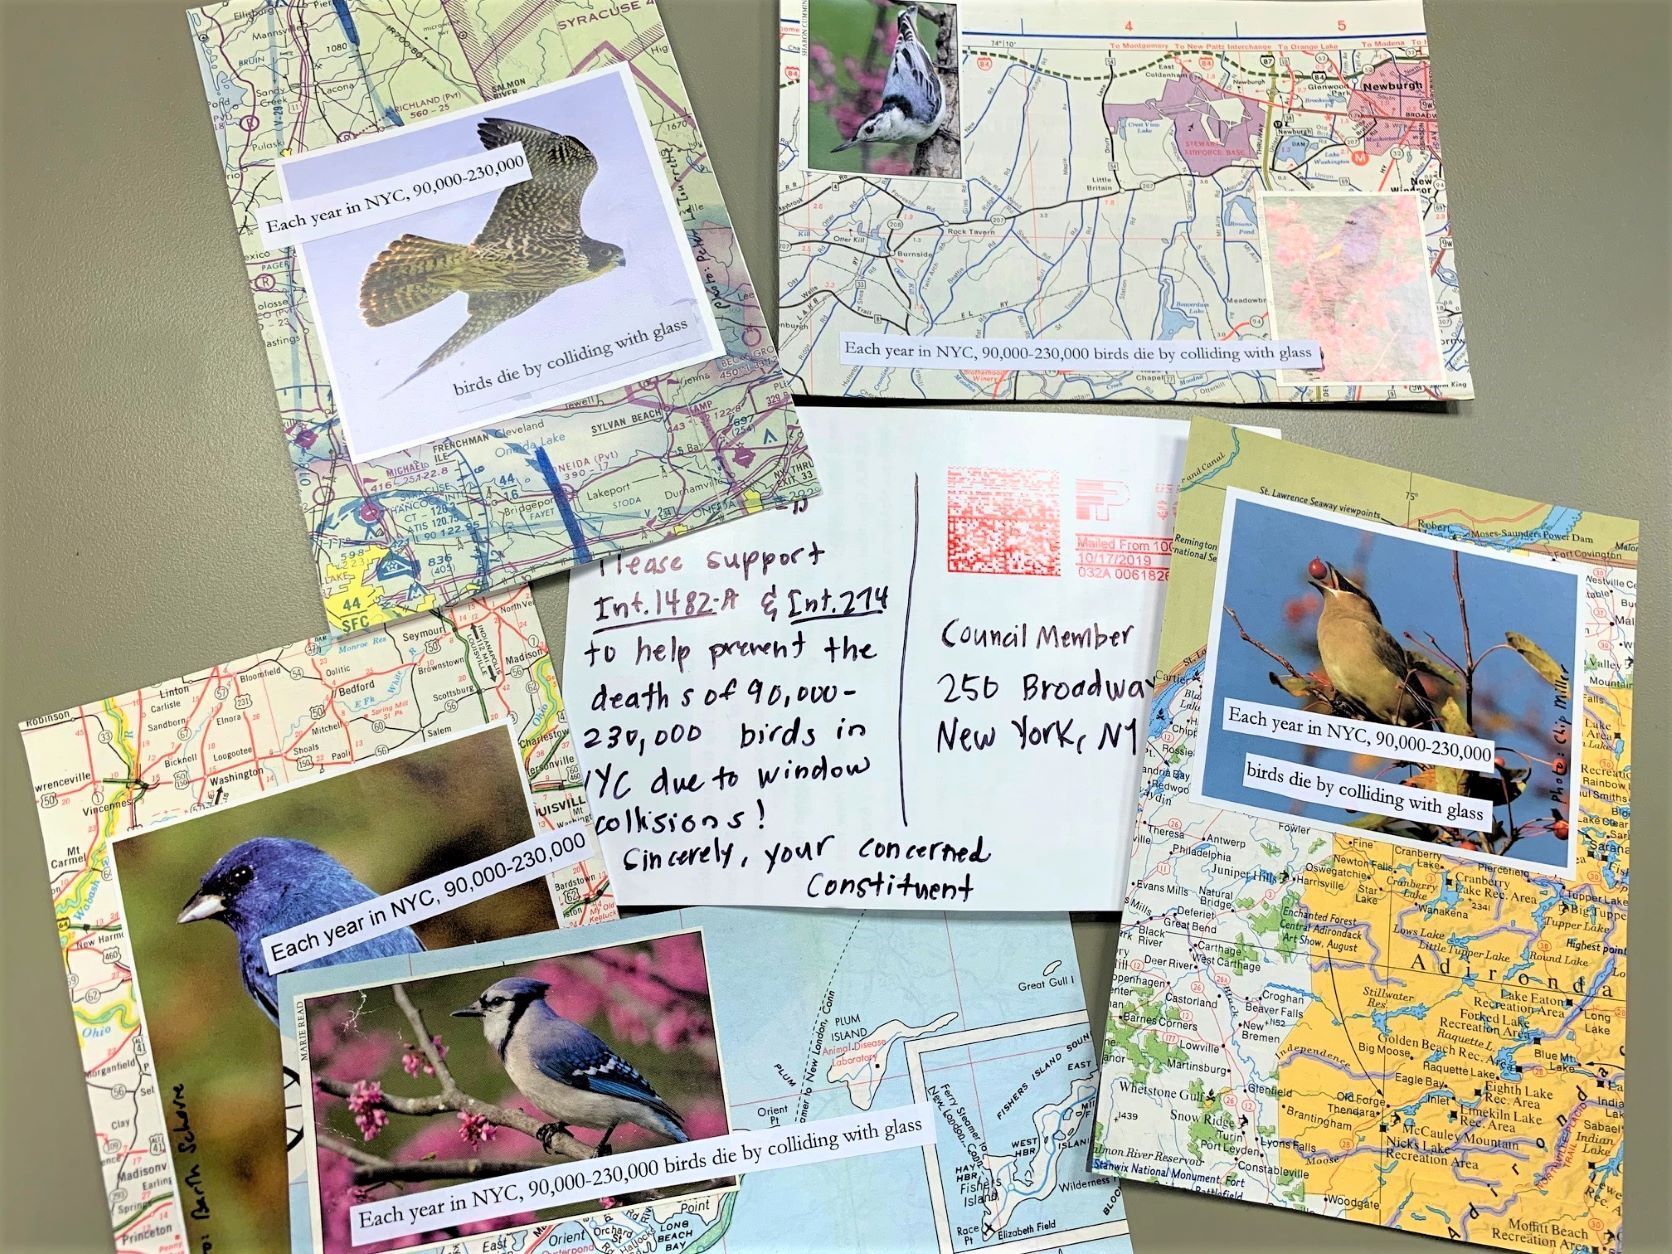 Advocacy volunteers wrote thousands of postcards in support of New York City's landmark bird-friendly design law. Photo: NYC Audubon